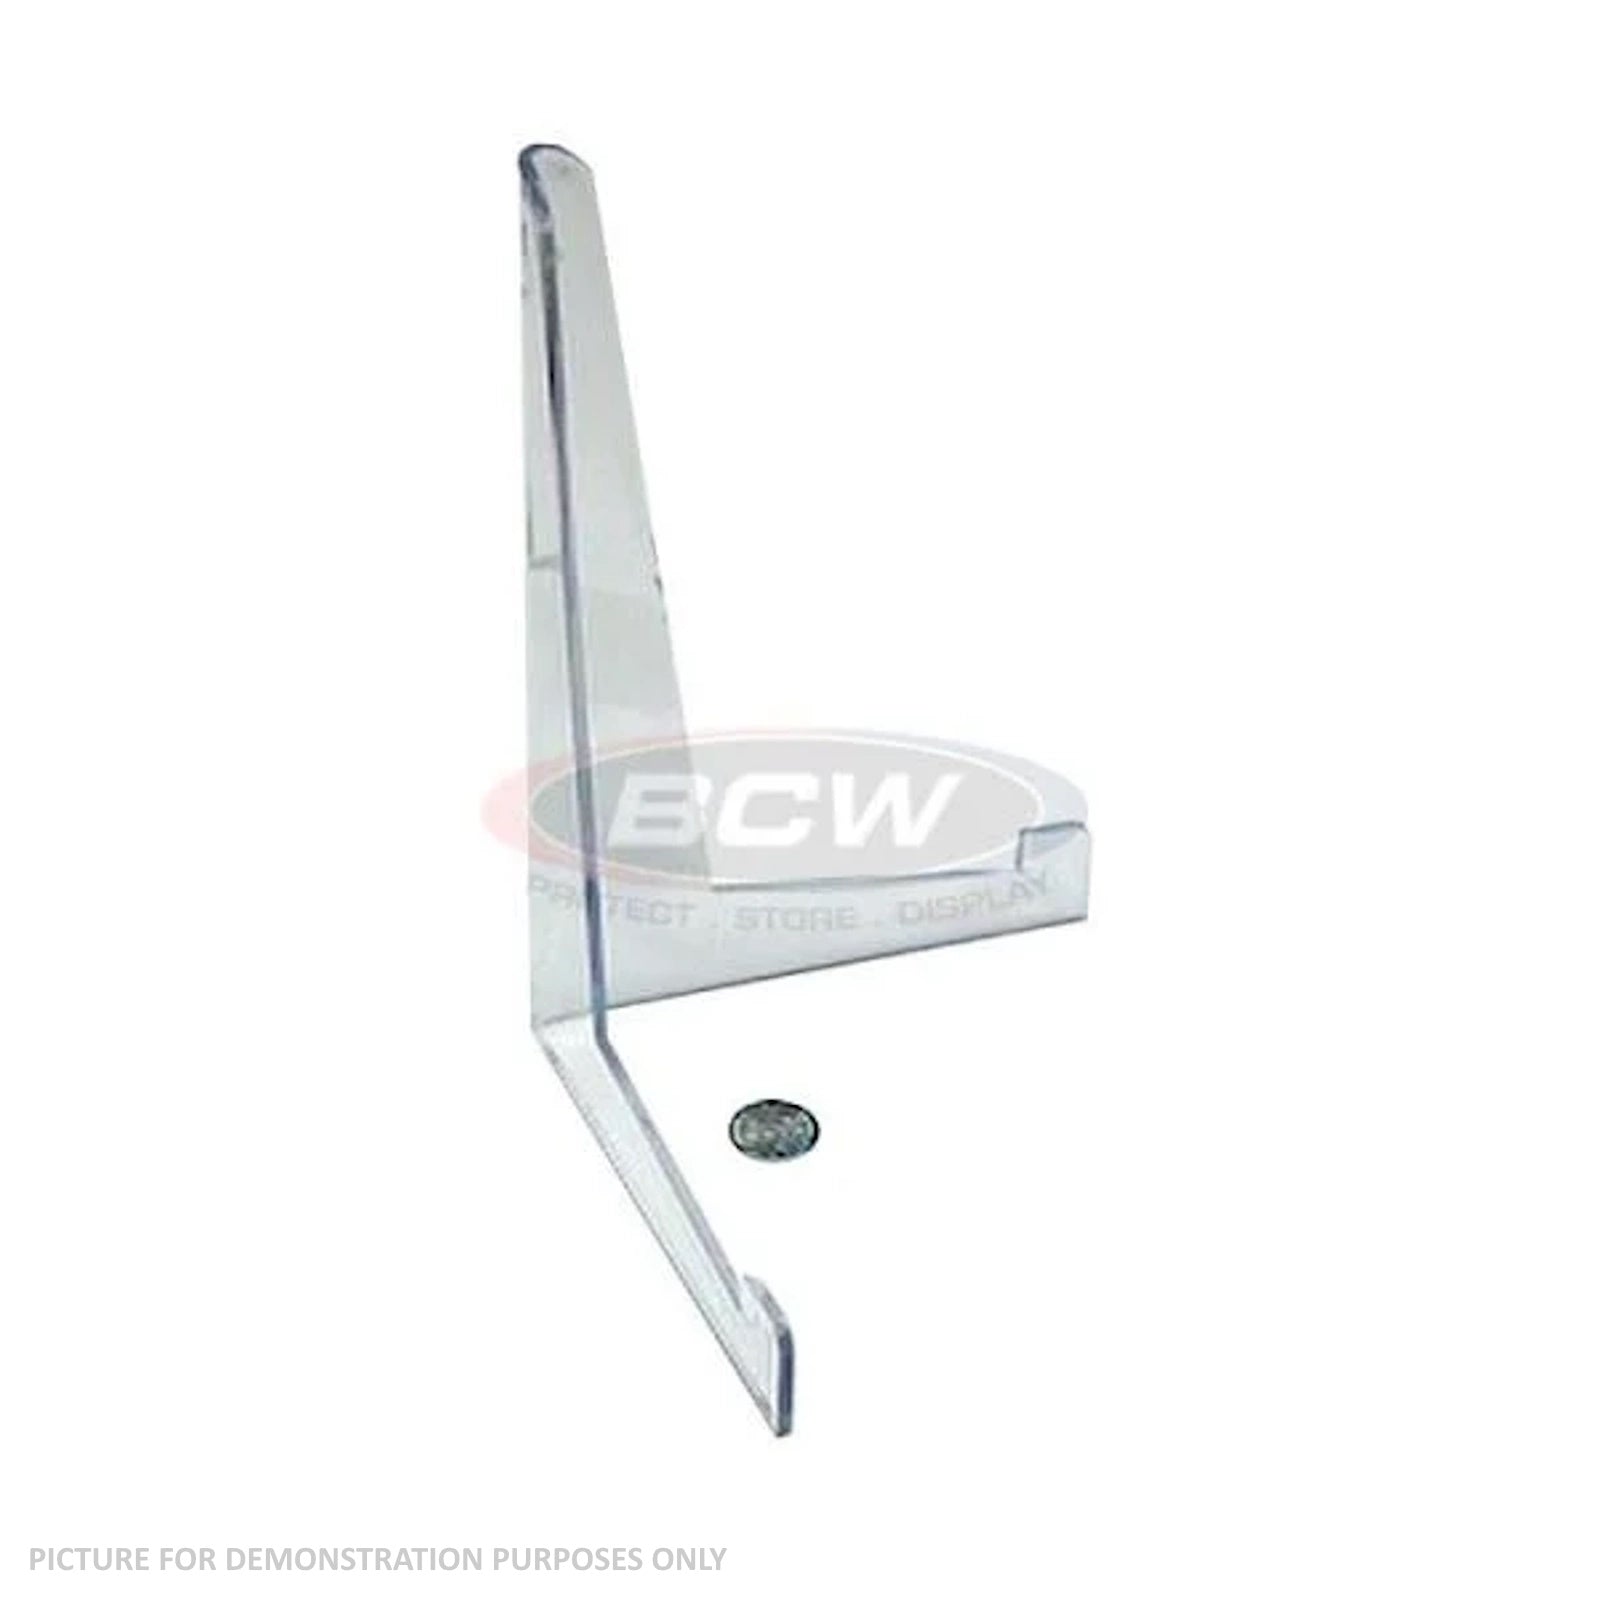 BCW Large Display Stand